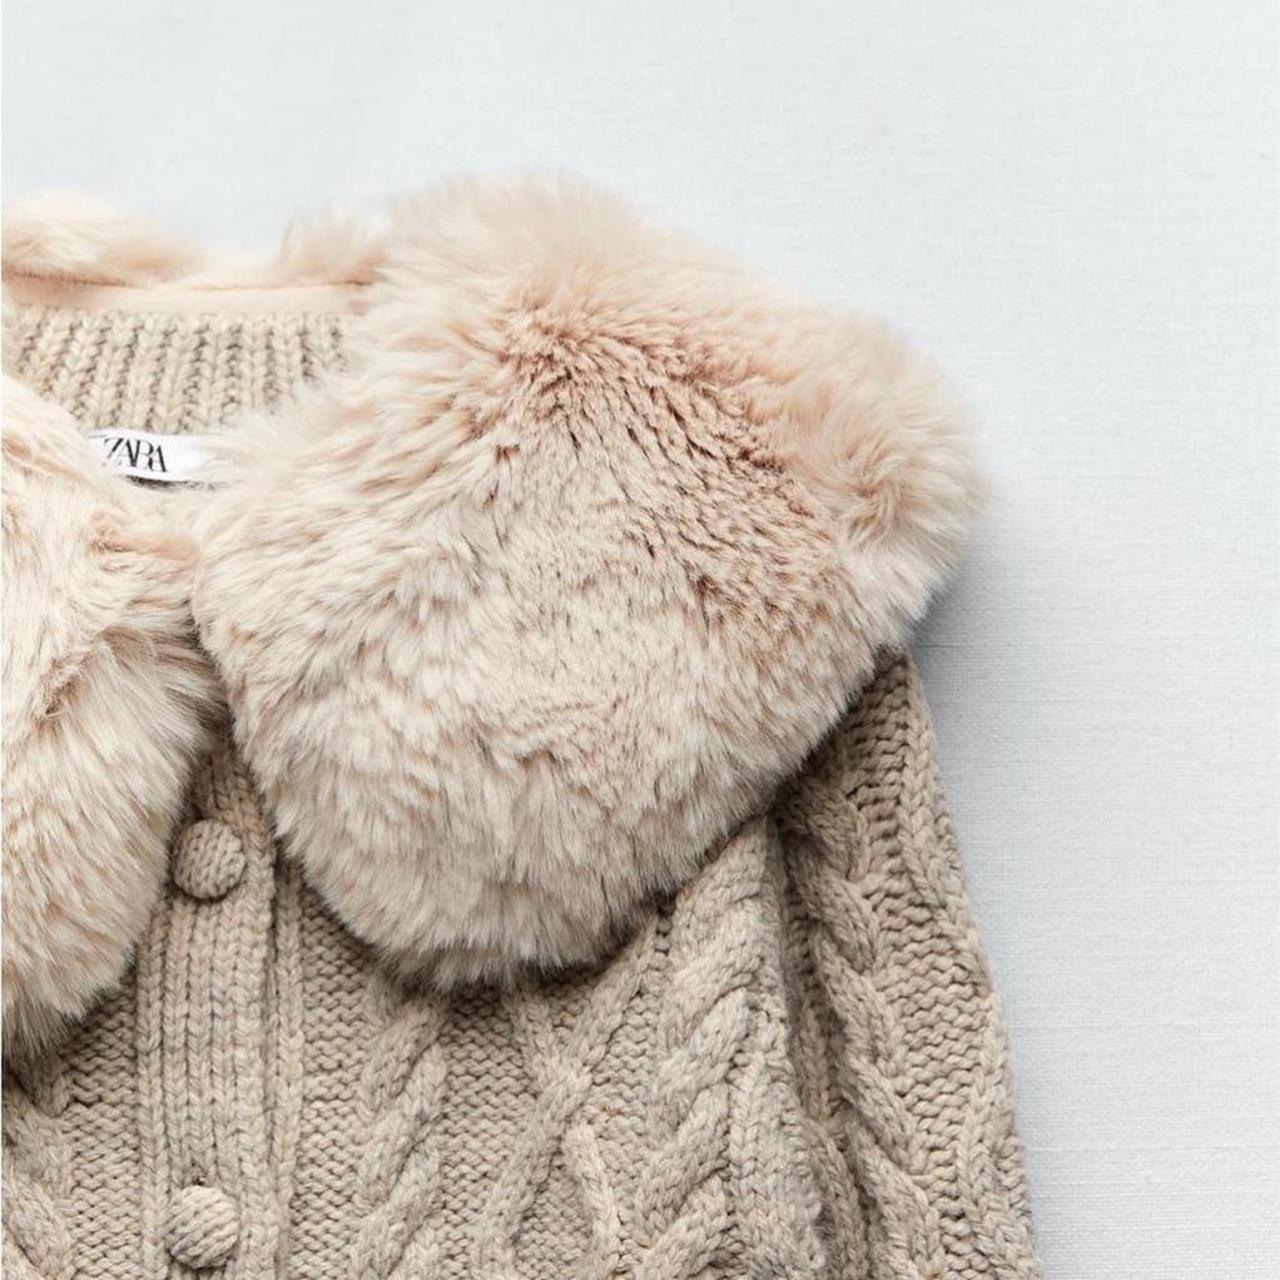 NWT ZARA CARDIGAN WITH FAUX FUR COLLAR, Pit to pit